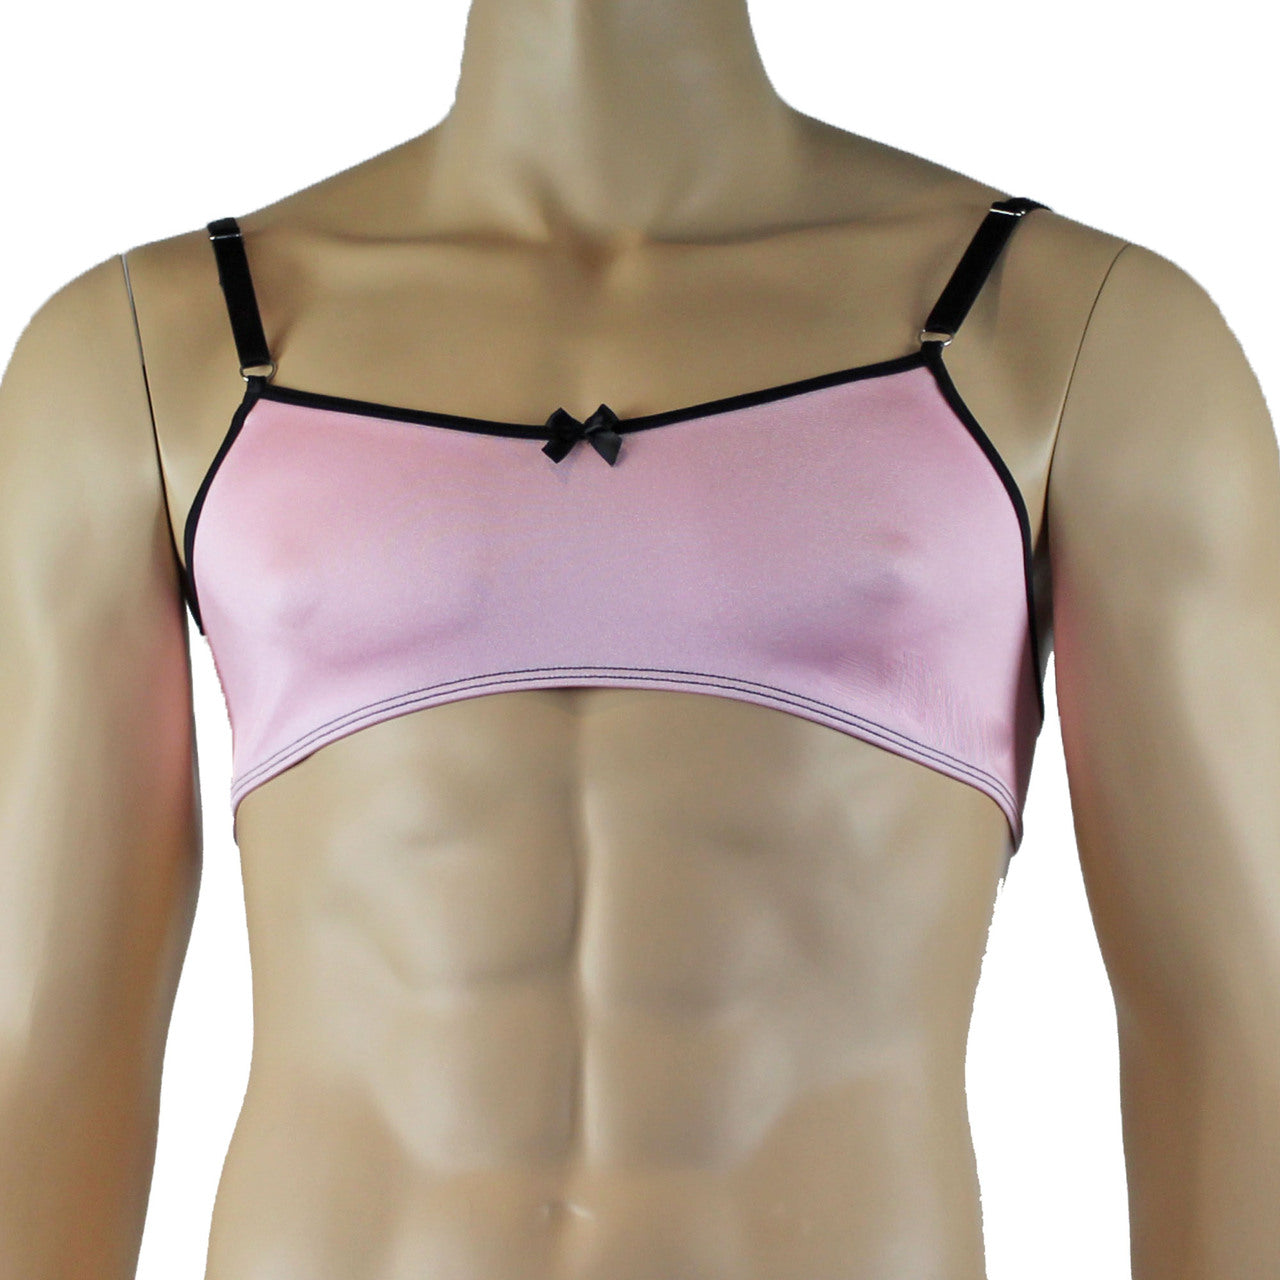 Mens Twinkle Lingerie Spandex Bra with Bow, Light Pink & Black